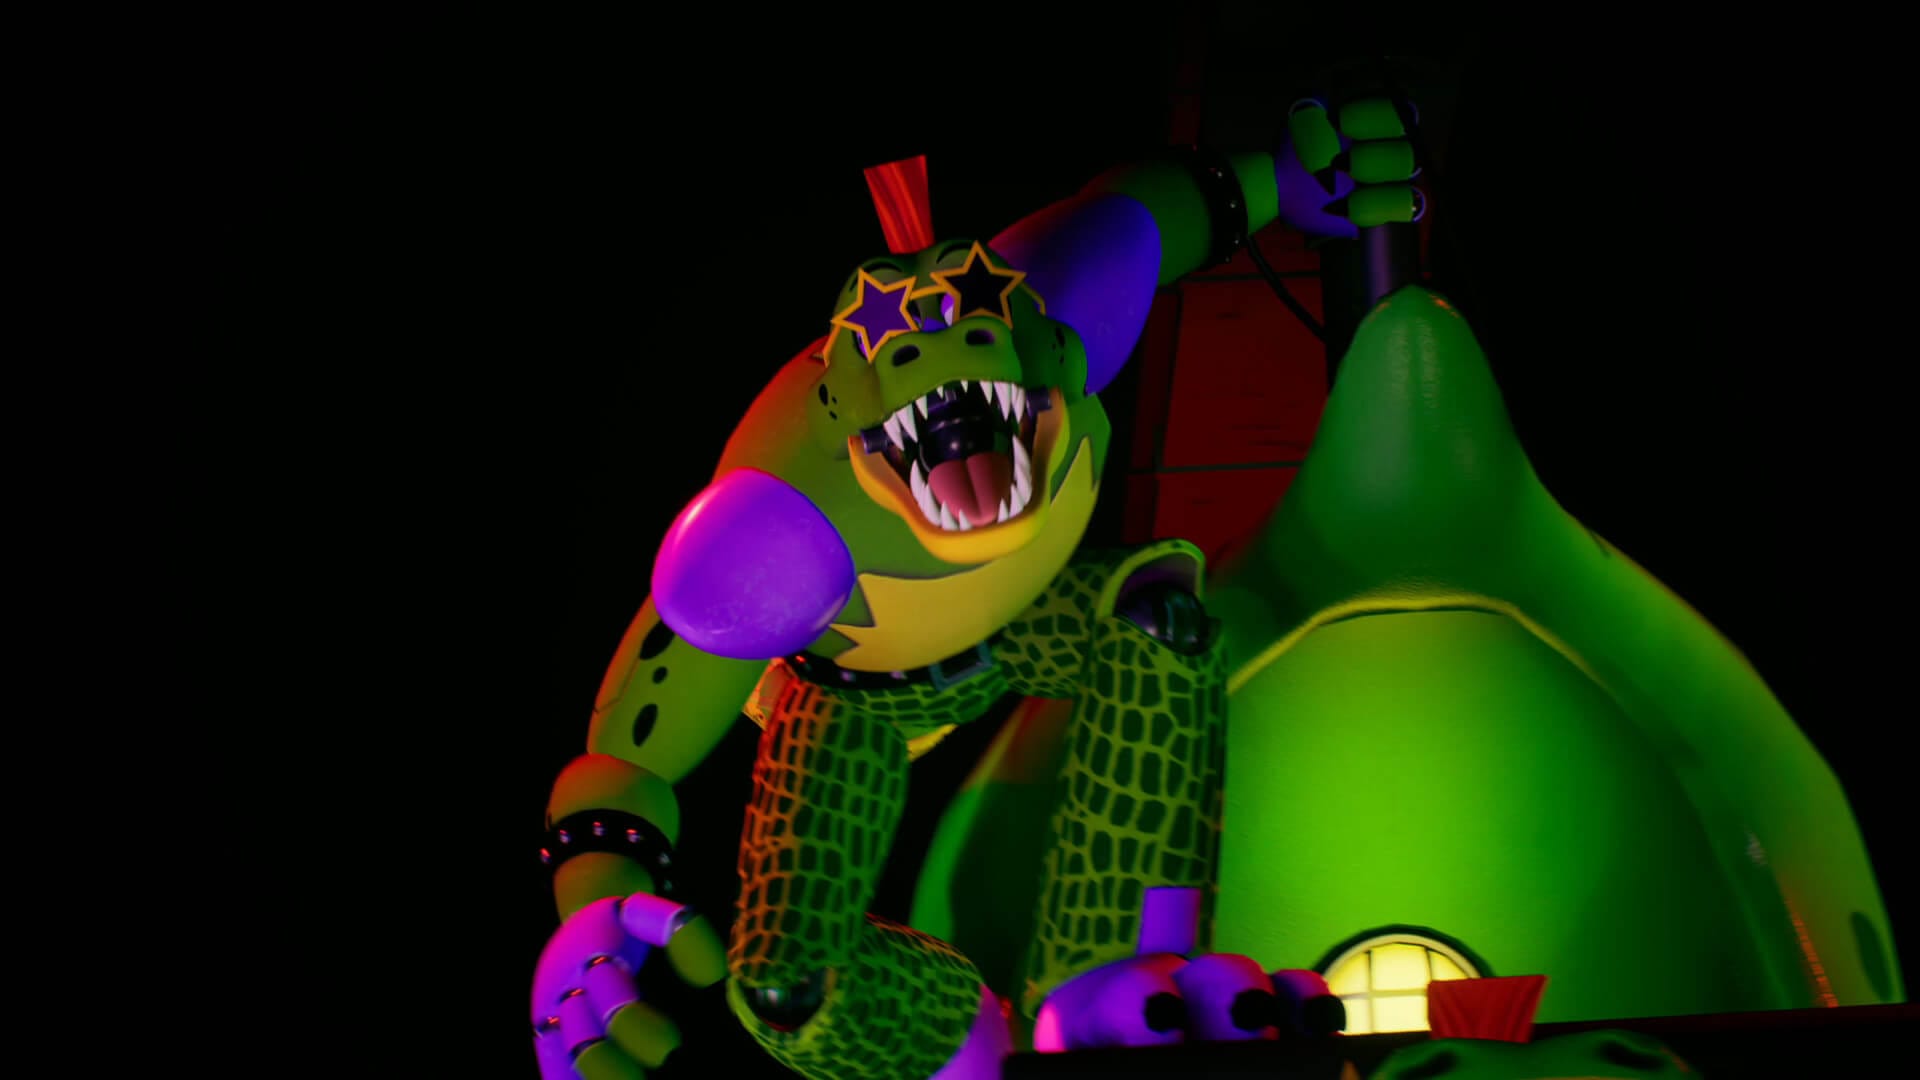 Report: Blumhouse's 'Five Nights at Freddy's 2' Set To Begin